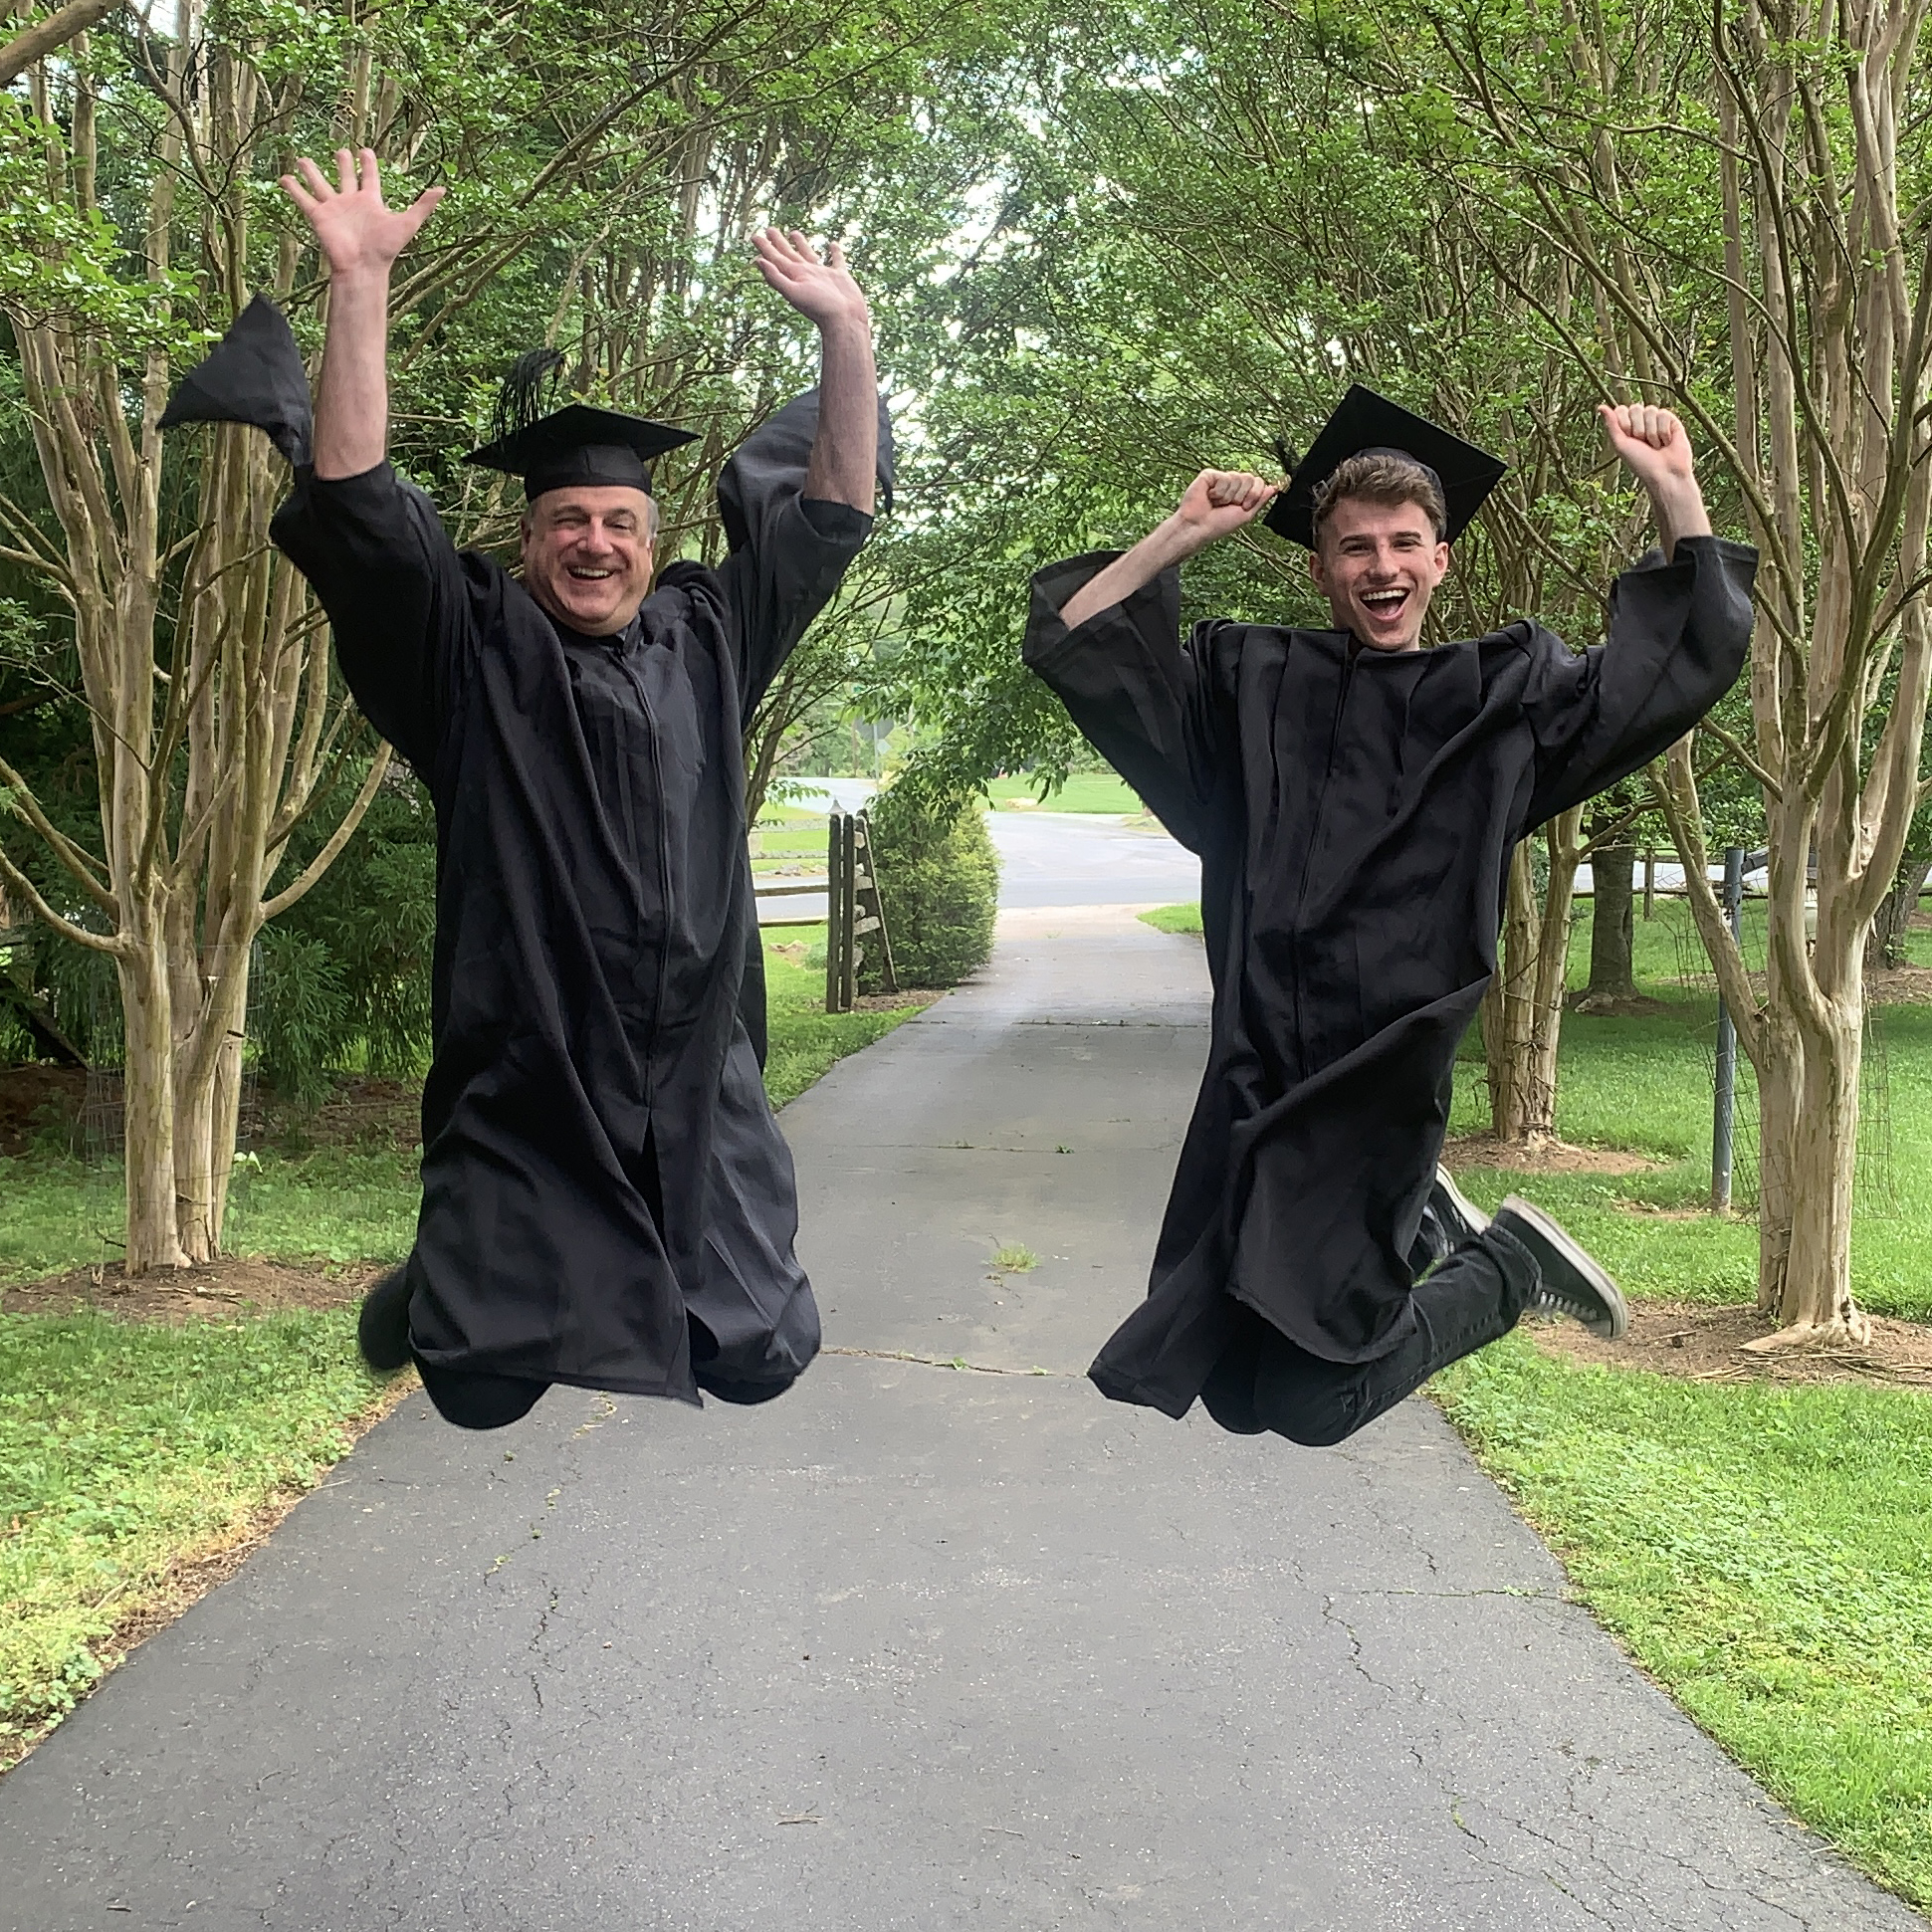 Father and son Michael and Sam Solomon leap into the air wearing their graduation gowns